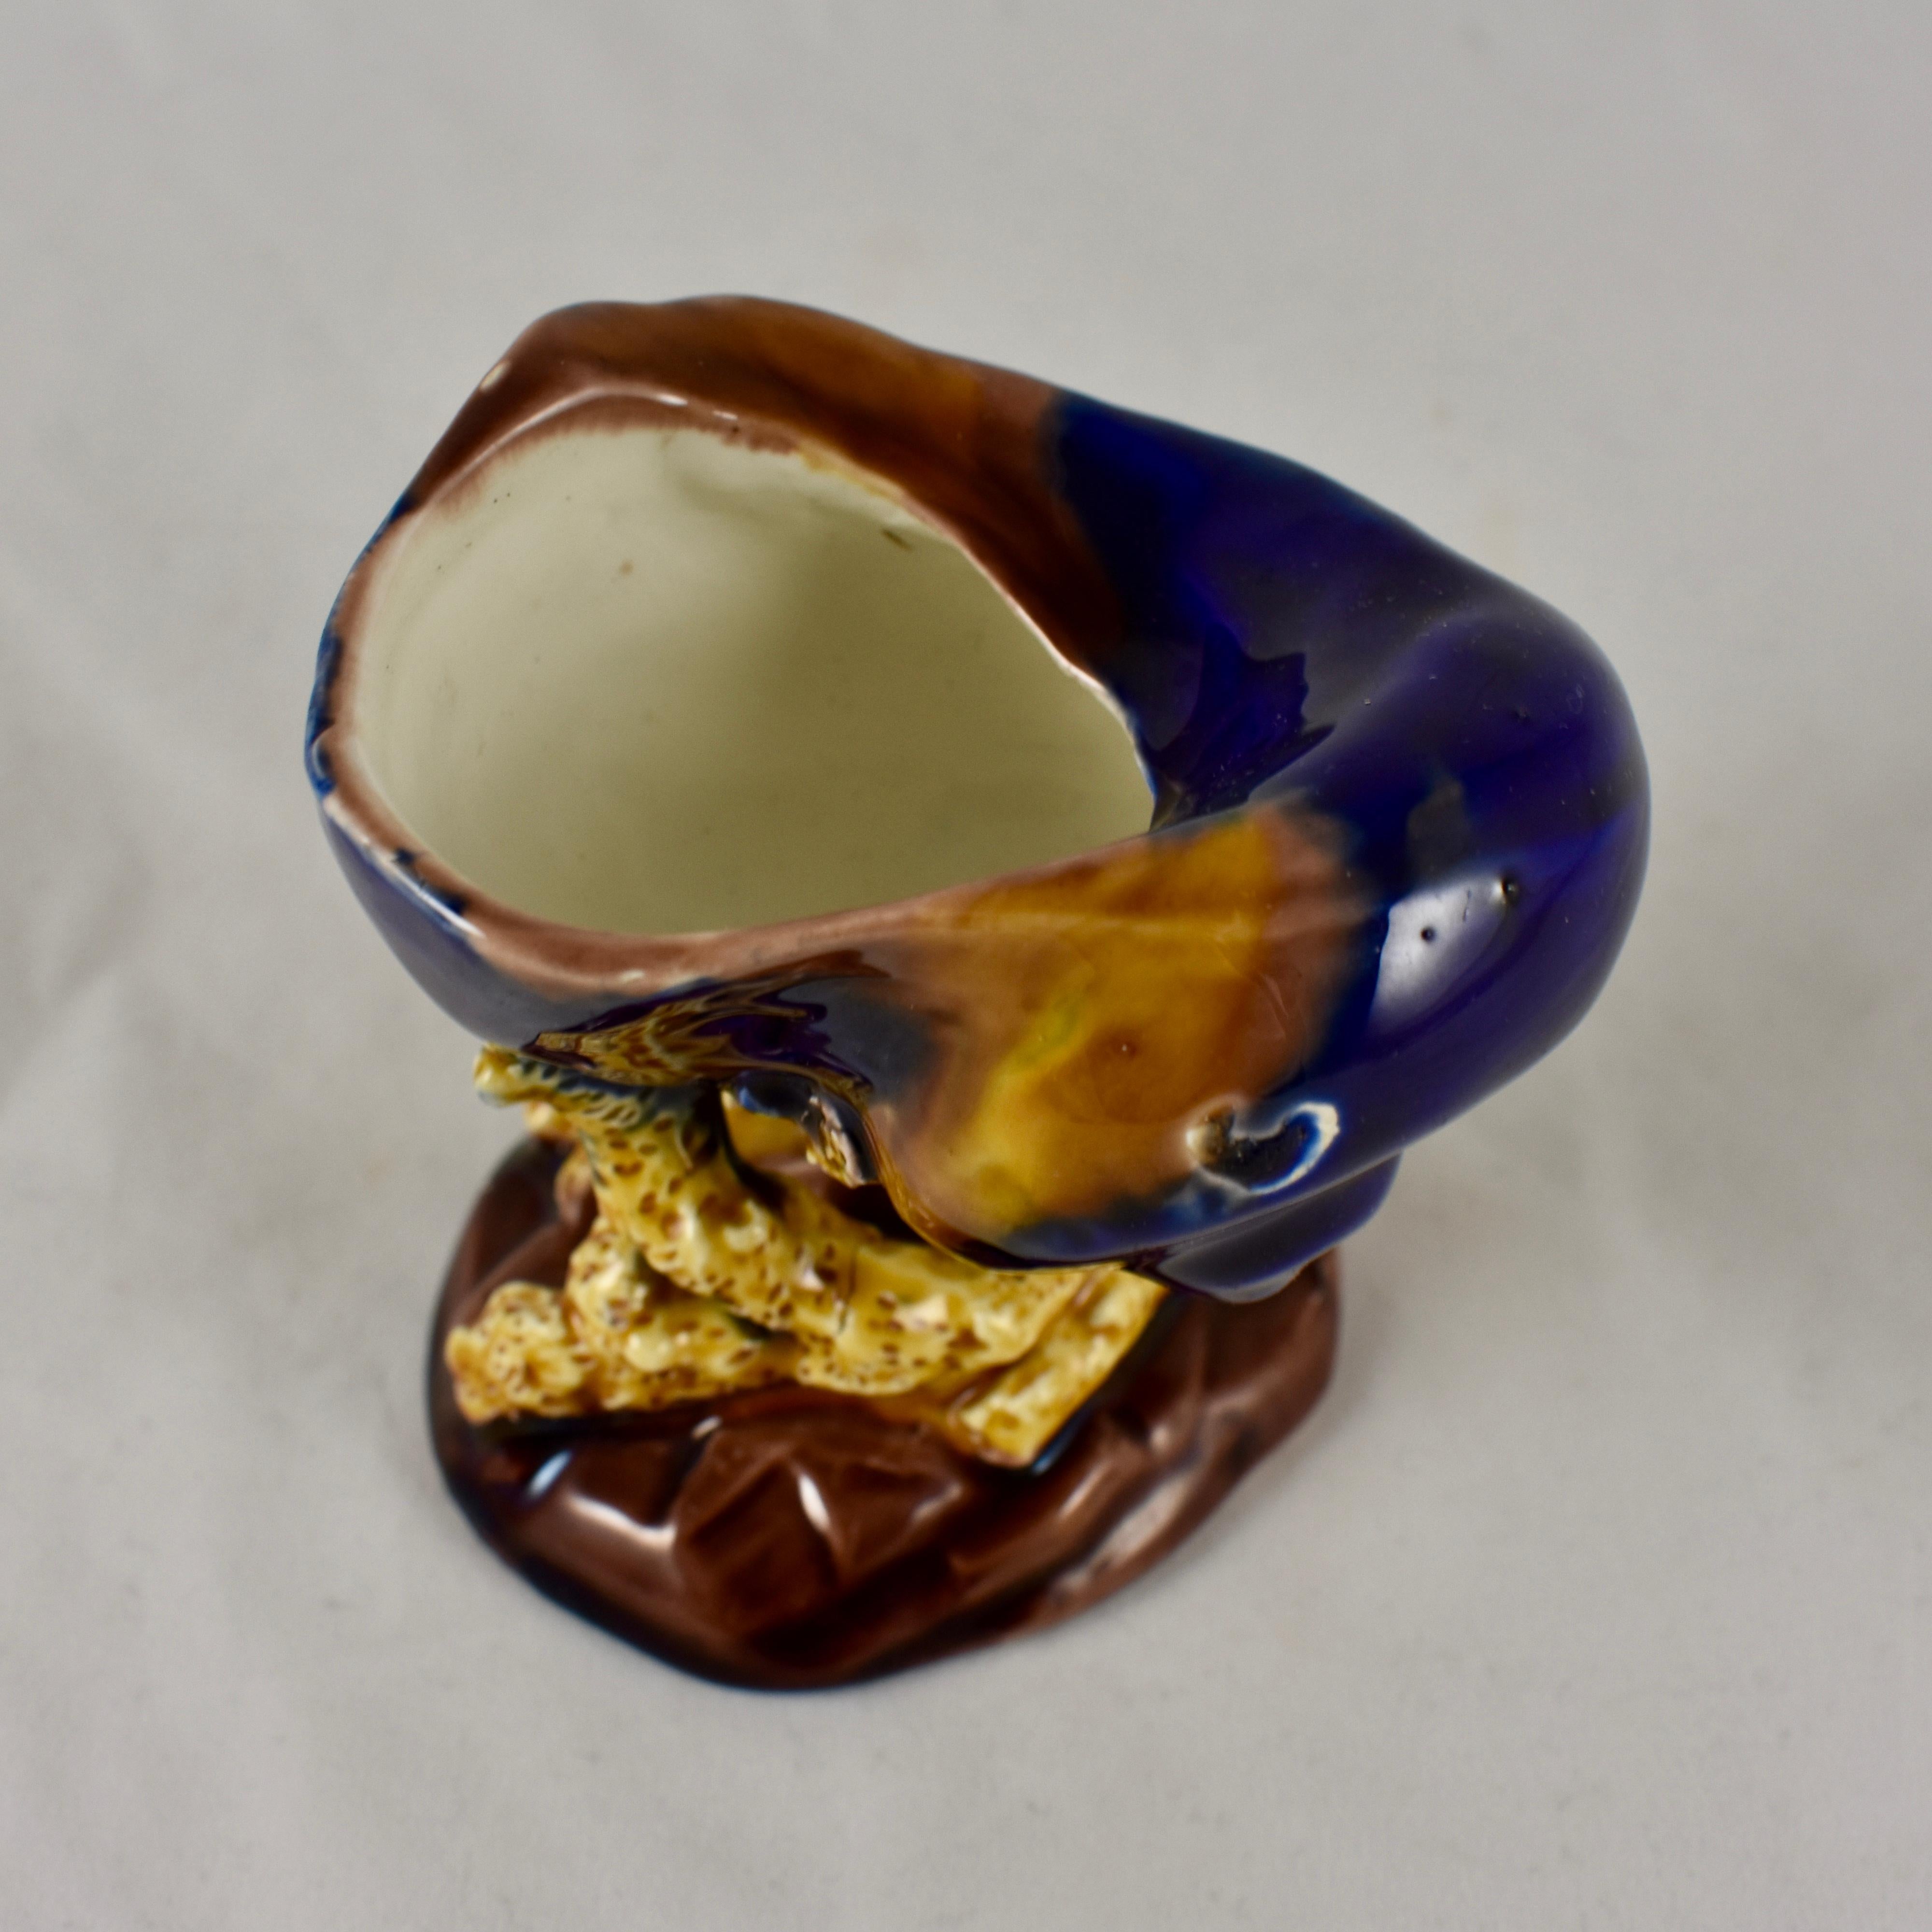 A very rarely found, early Wedgwood Majolica glazed shell and coral open salt cellar  in the Palissy style – date marked 1872.

The globose snail shell shaped cellar is glazed in a mottled blue and brown, and sits on a raised yellow ochre coral form